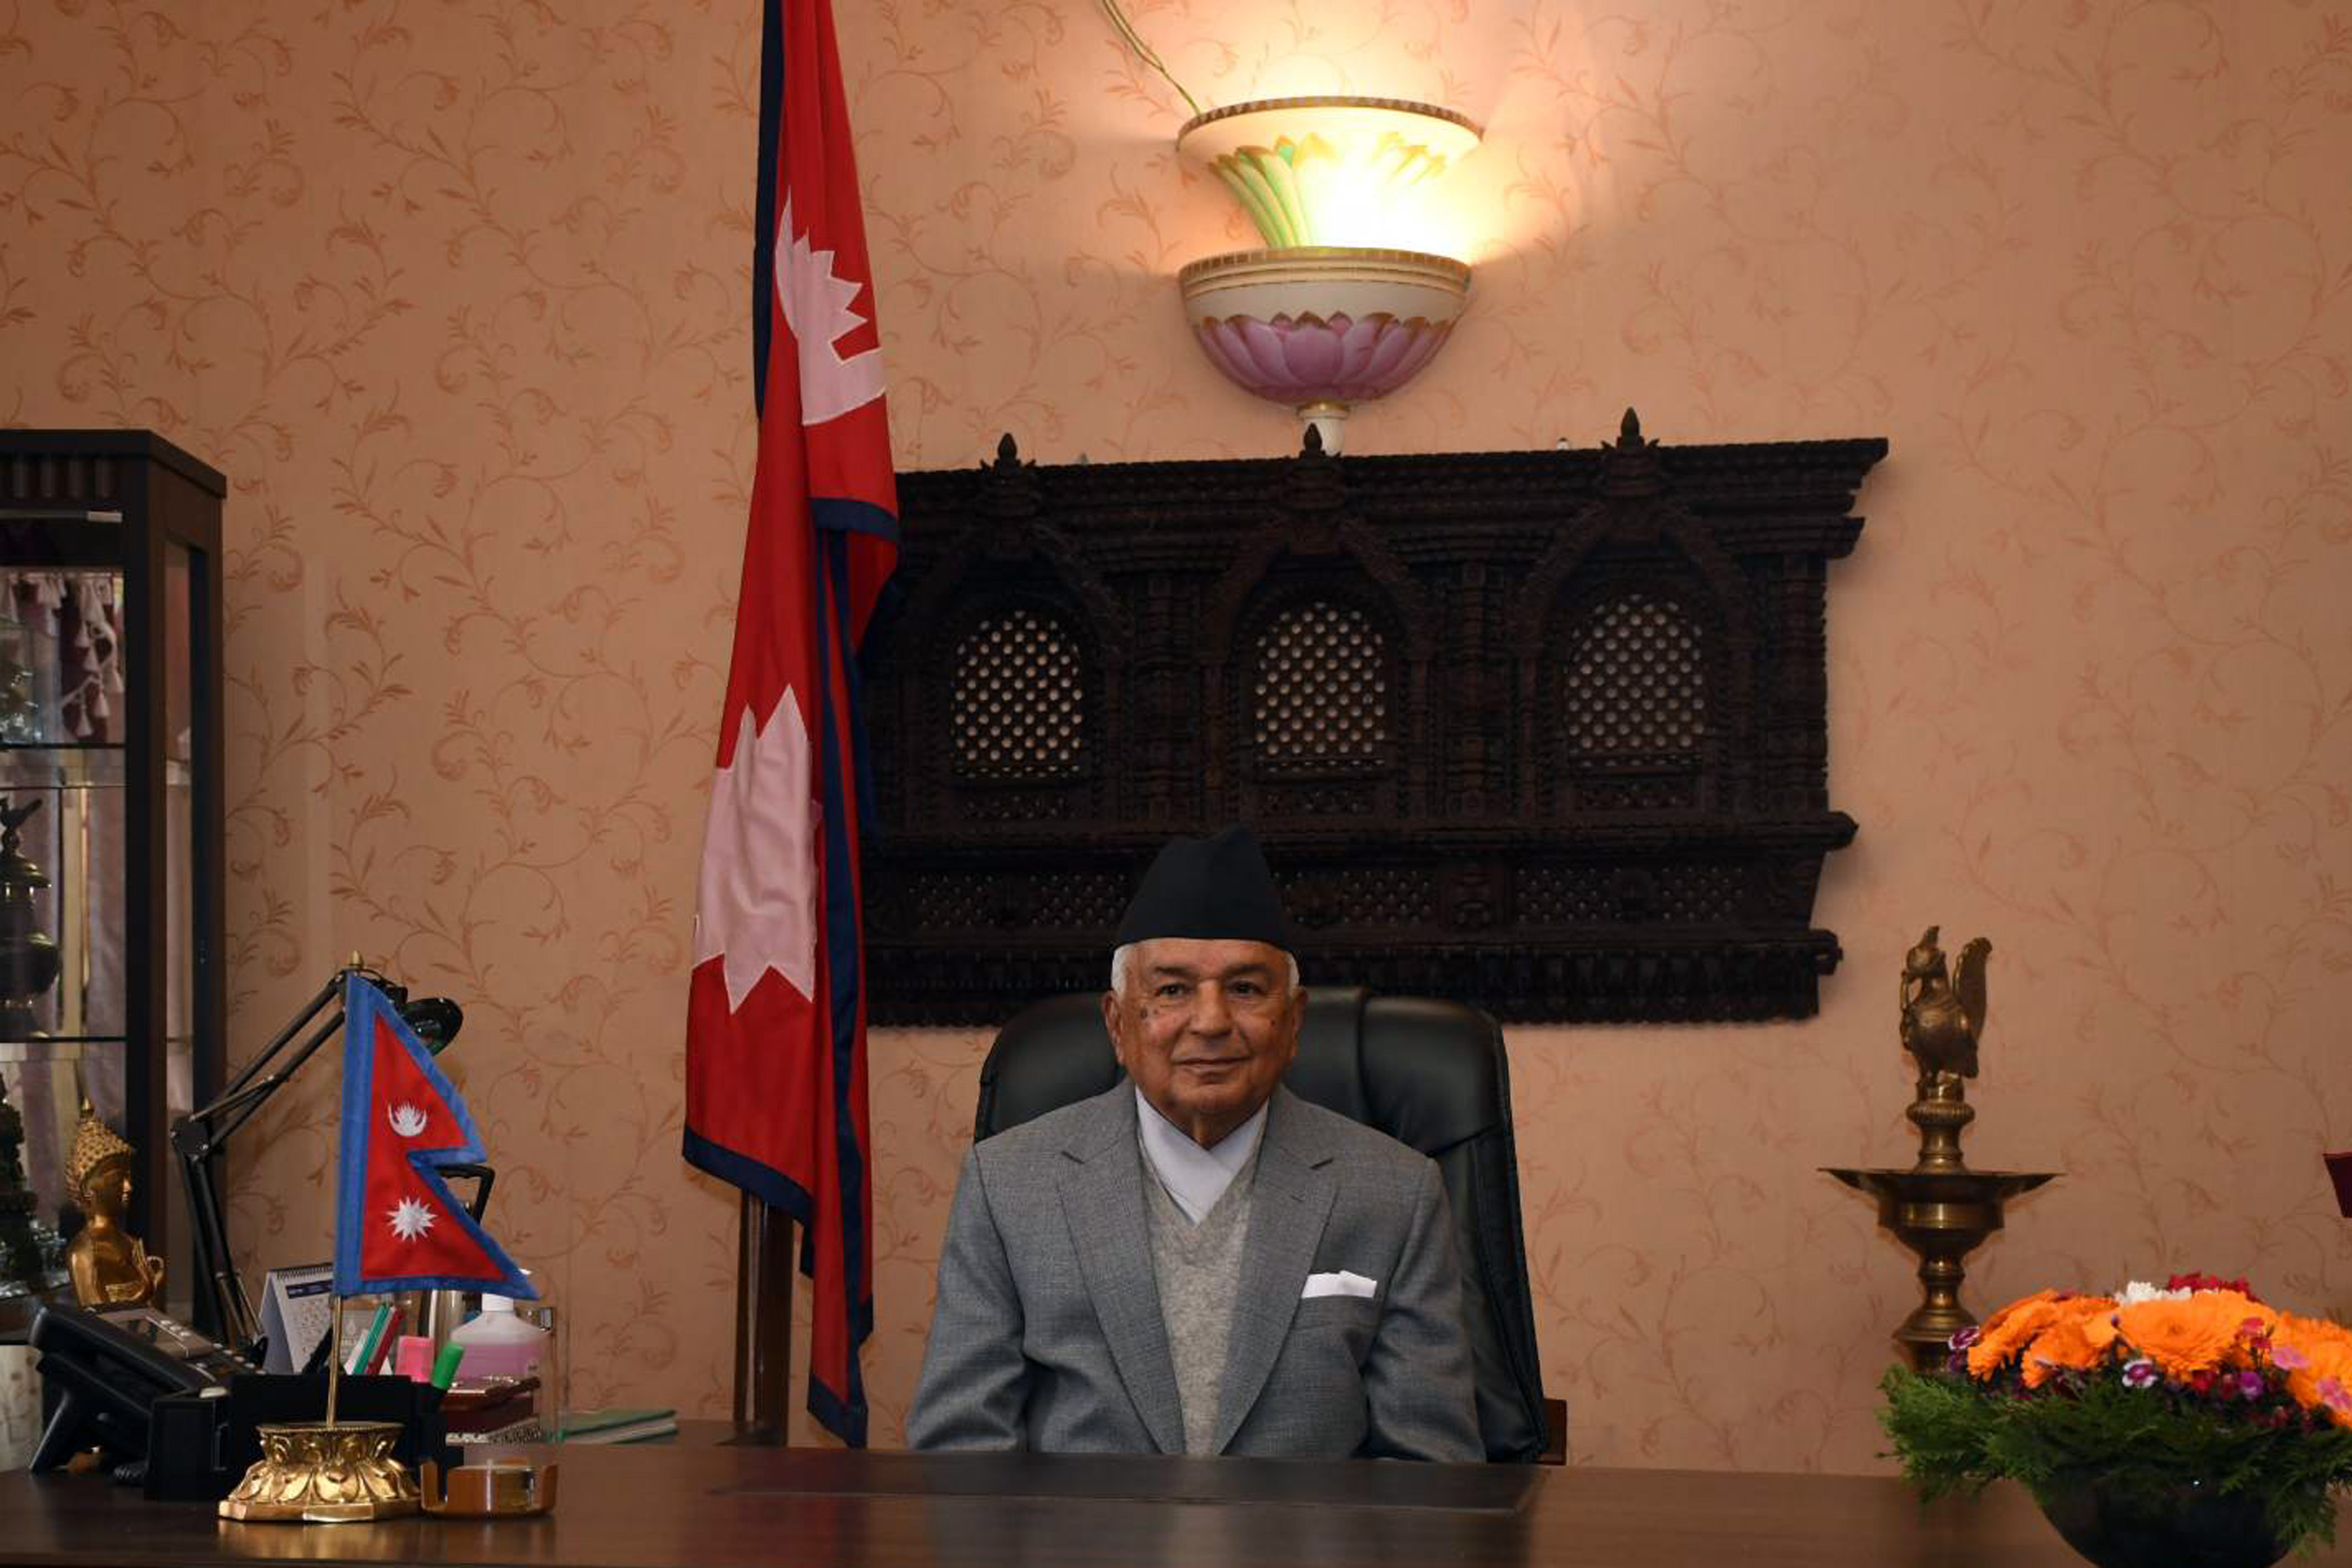 President Poudel extends greetings on the occasion of the 2622nd birth anniversary of Mahavir